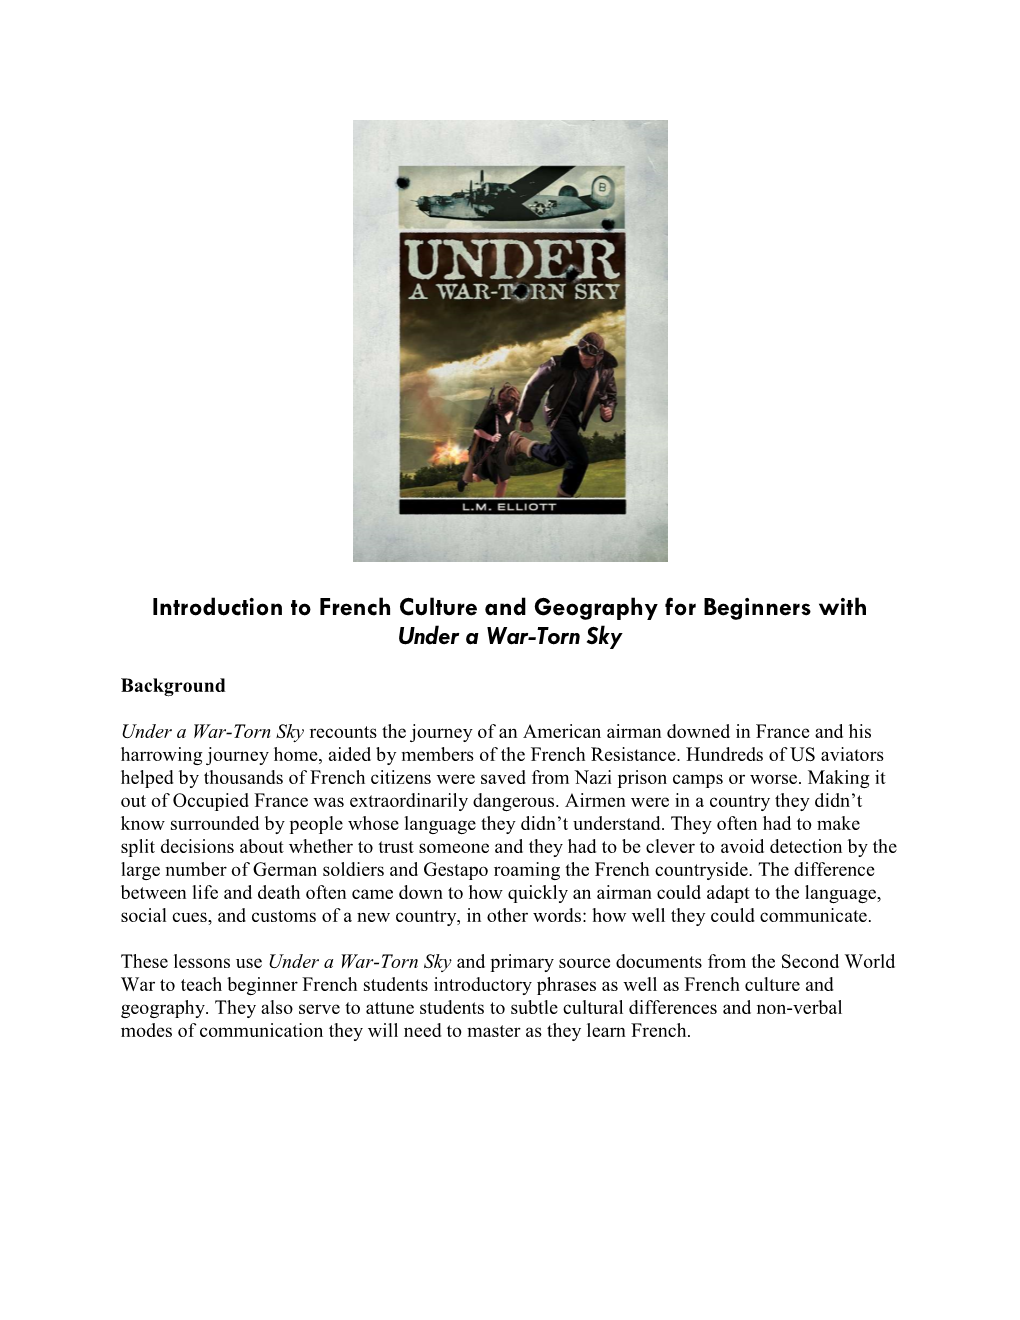 Introduction to French Culture and Geography for Beginners with Under a War-Torn Sky